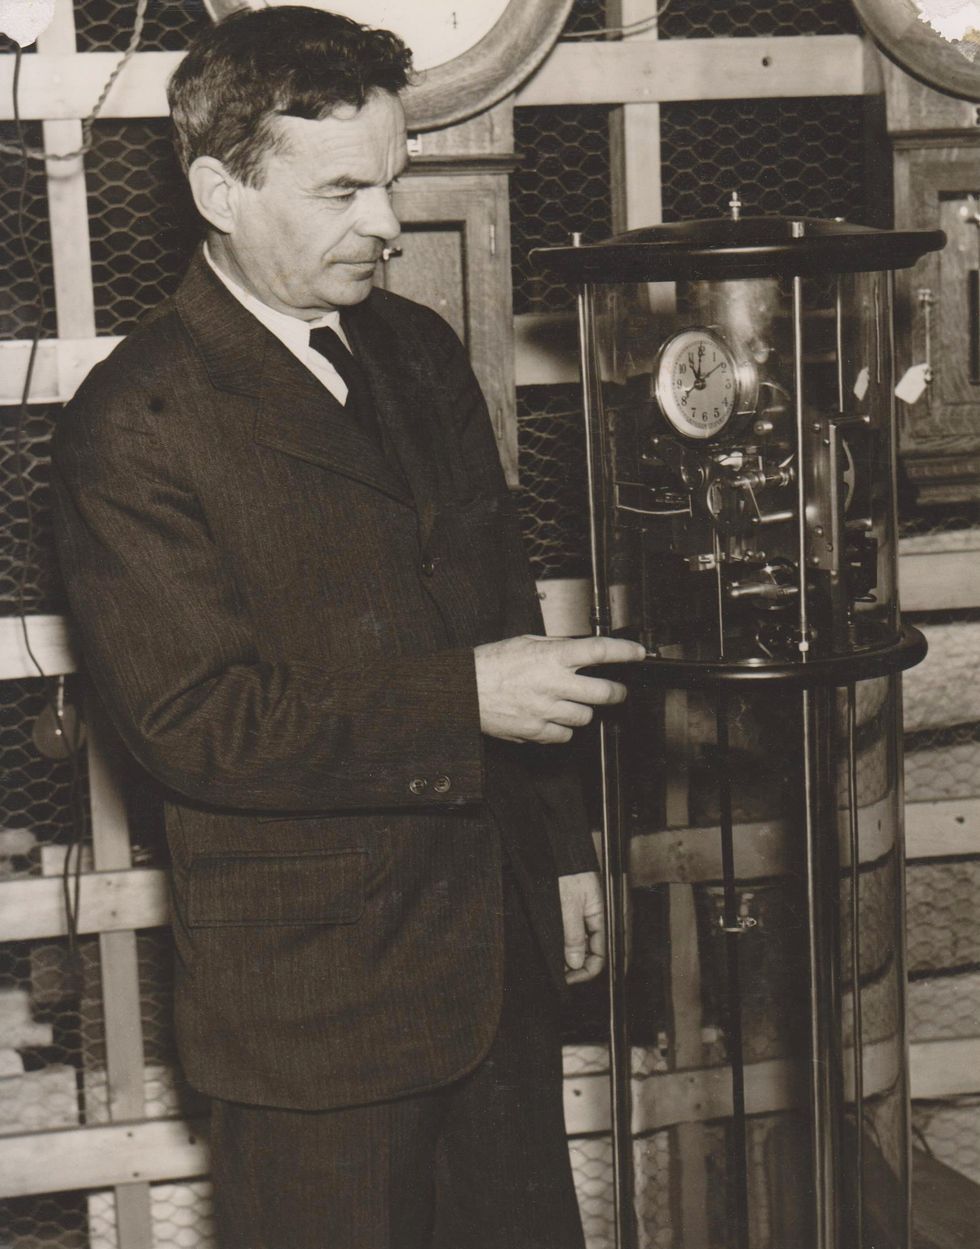 Photo of a man in a suit looking at and pointing to a clock apparatus.